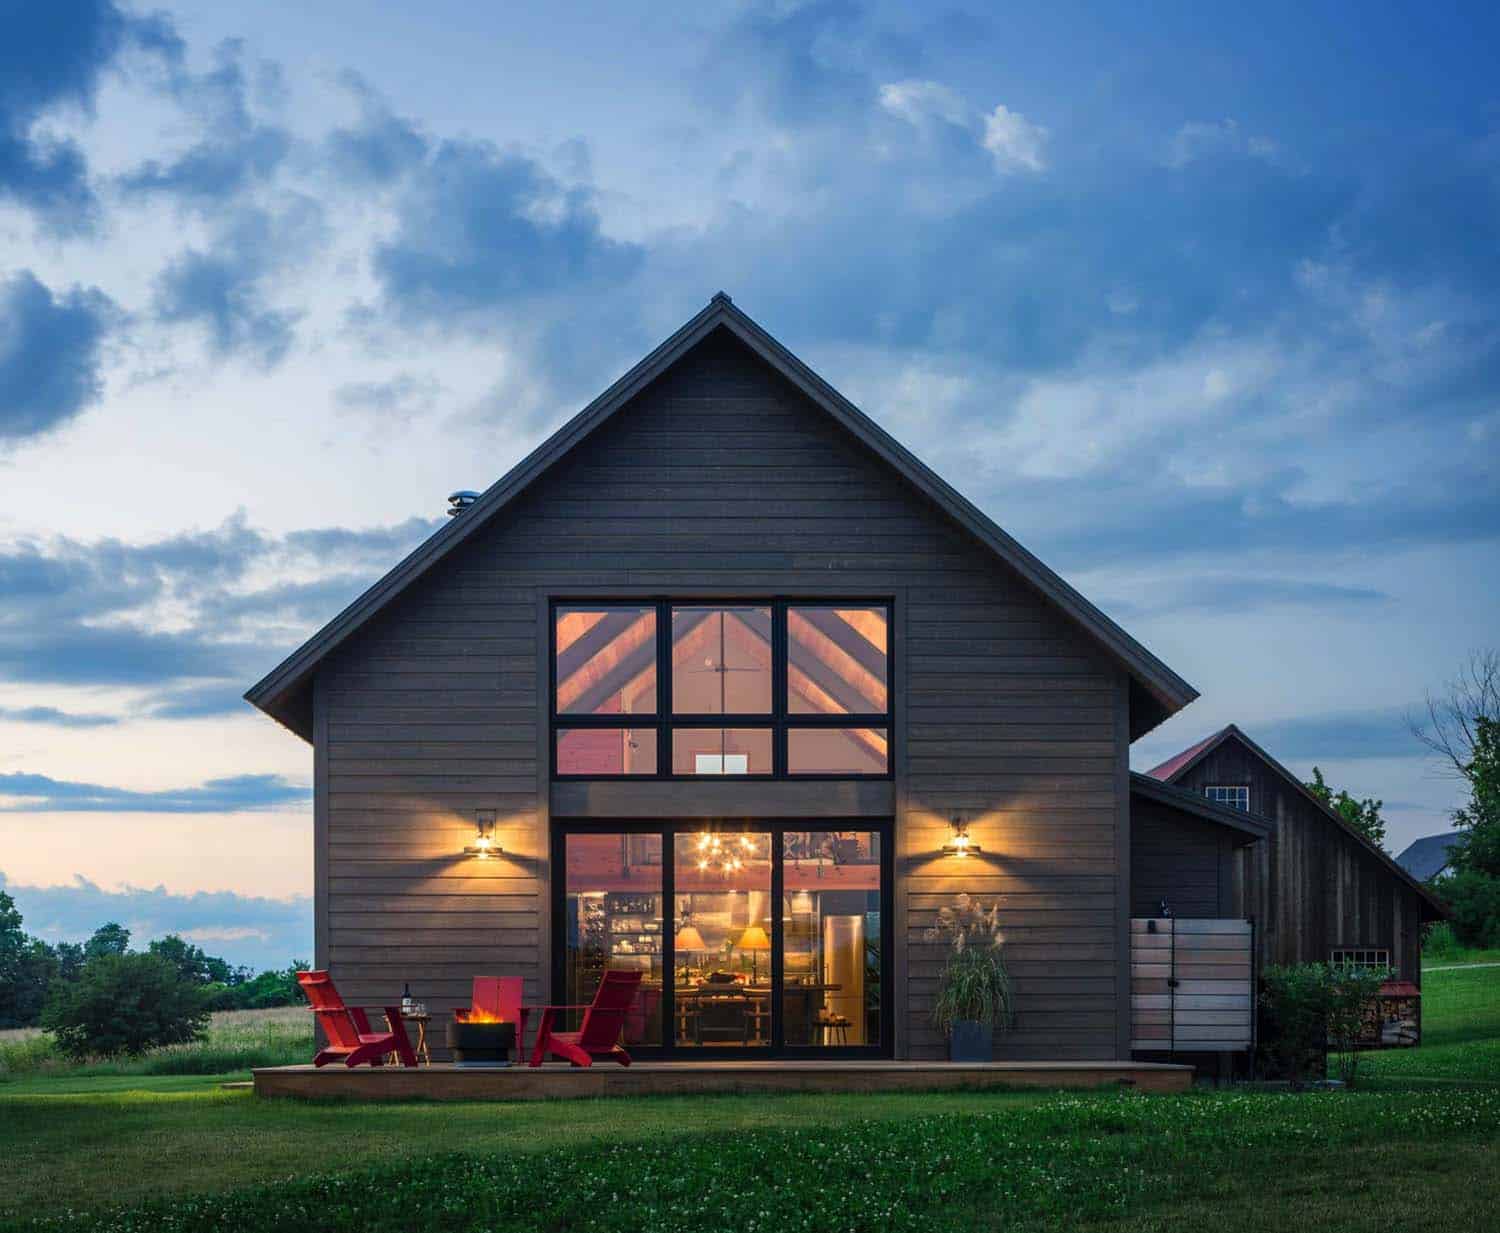 Dreamiest details in this modern farmhouse style home tour in Minnesota